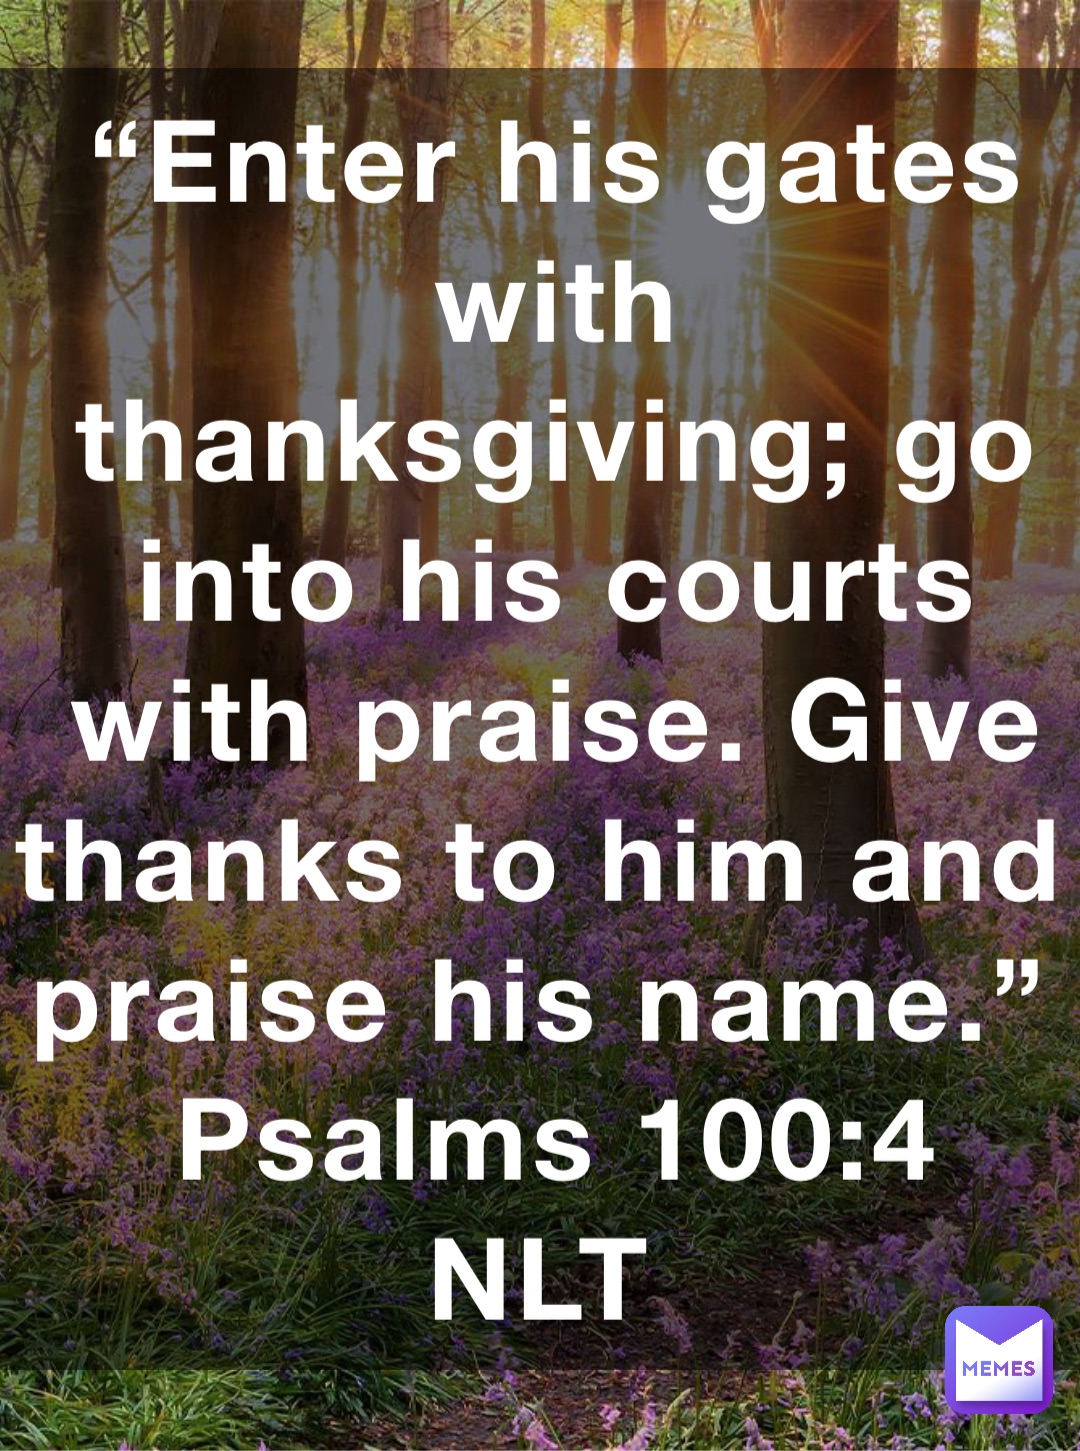 “Enter his gates with thanksgiving; go into his courts with praise. Give thanks to him and praise his name.”
‭‭Psalms‬ ‭100:4‬ ‭NLT‬‬